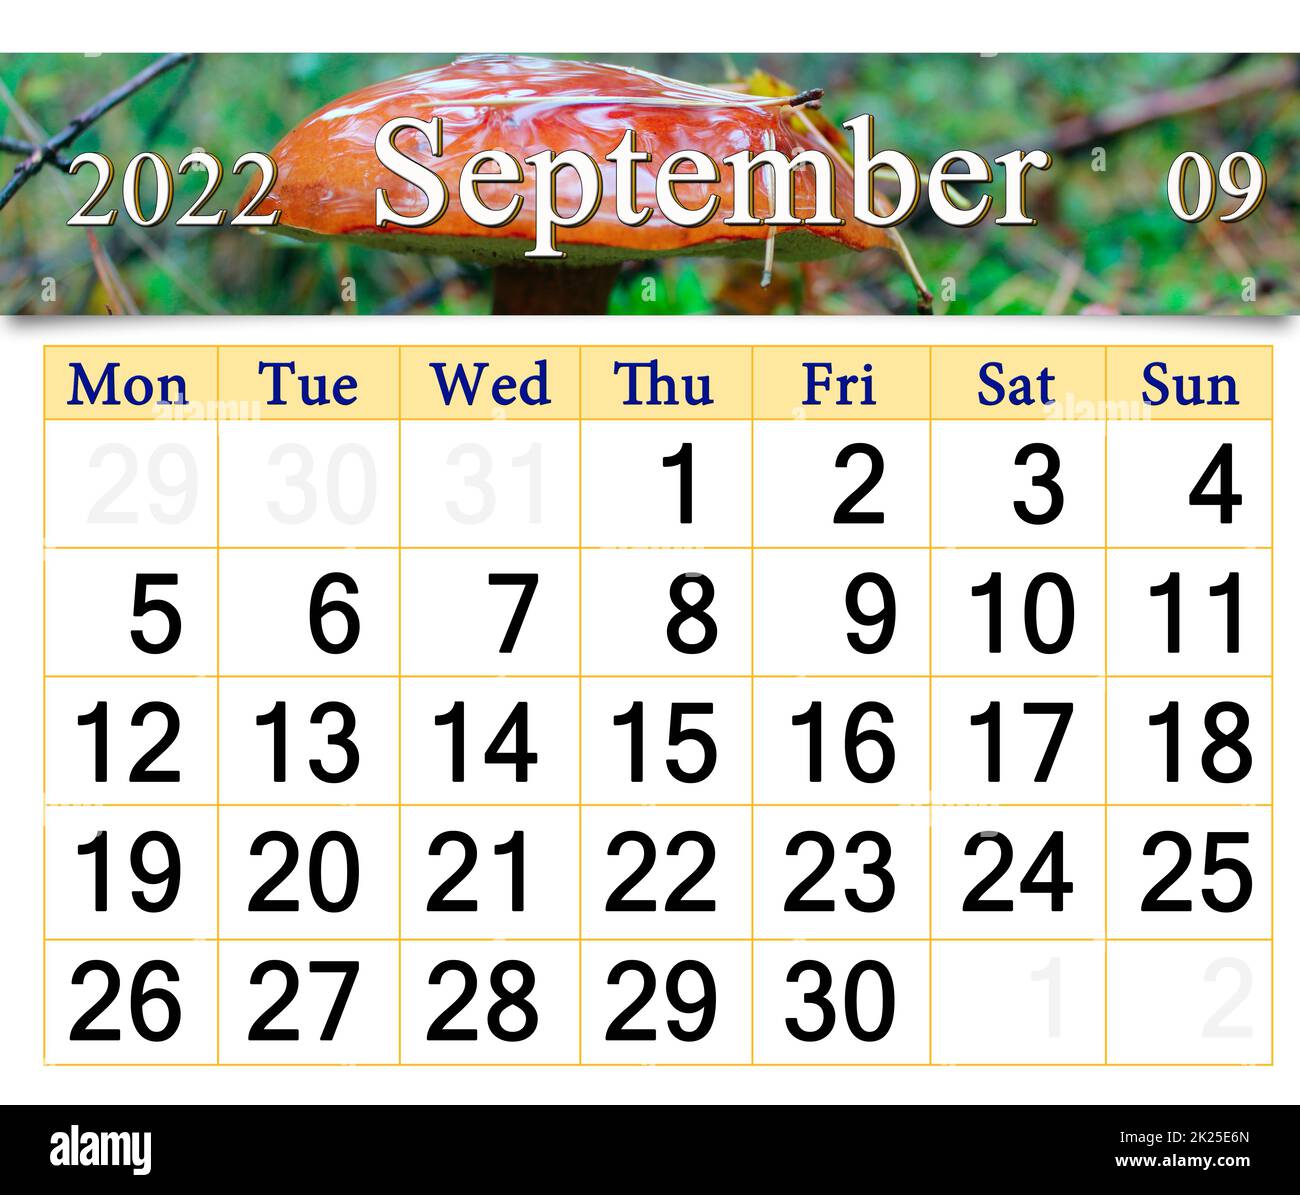 calendar for september 2022 with image of mushroom growing in forest Stock Photo